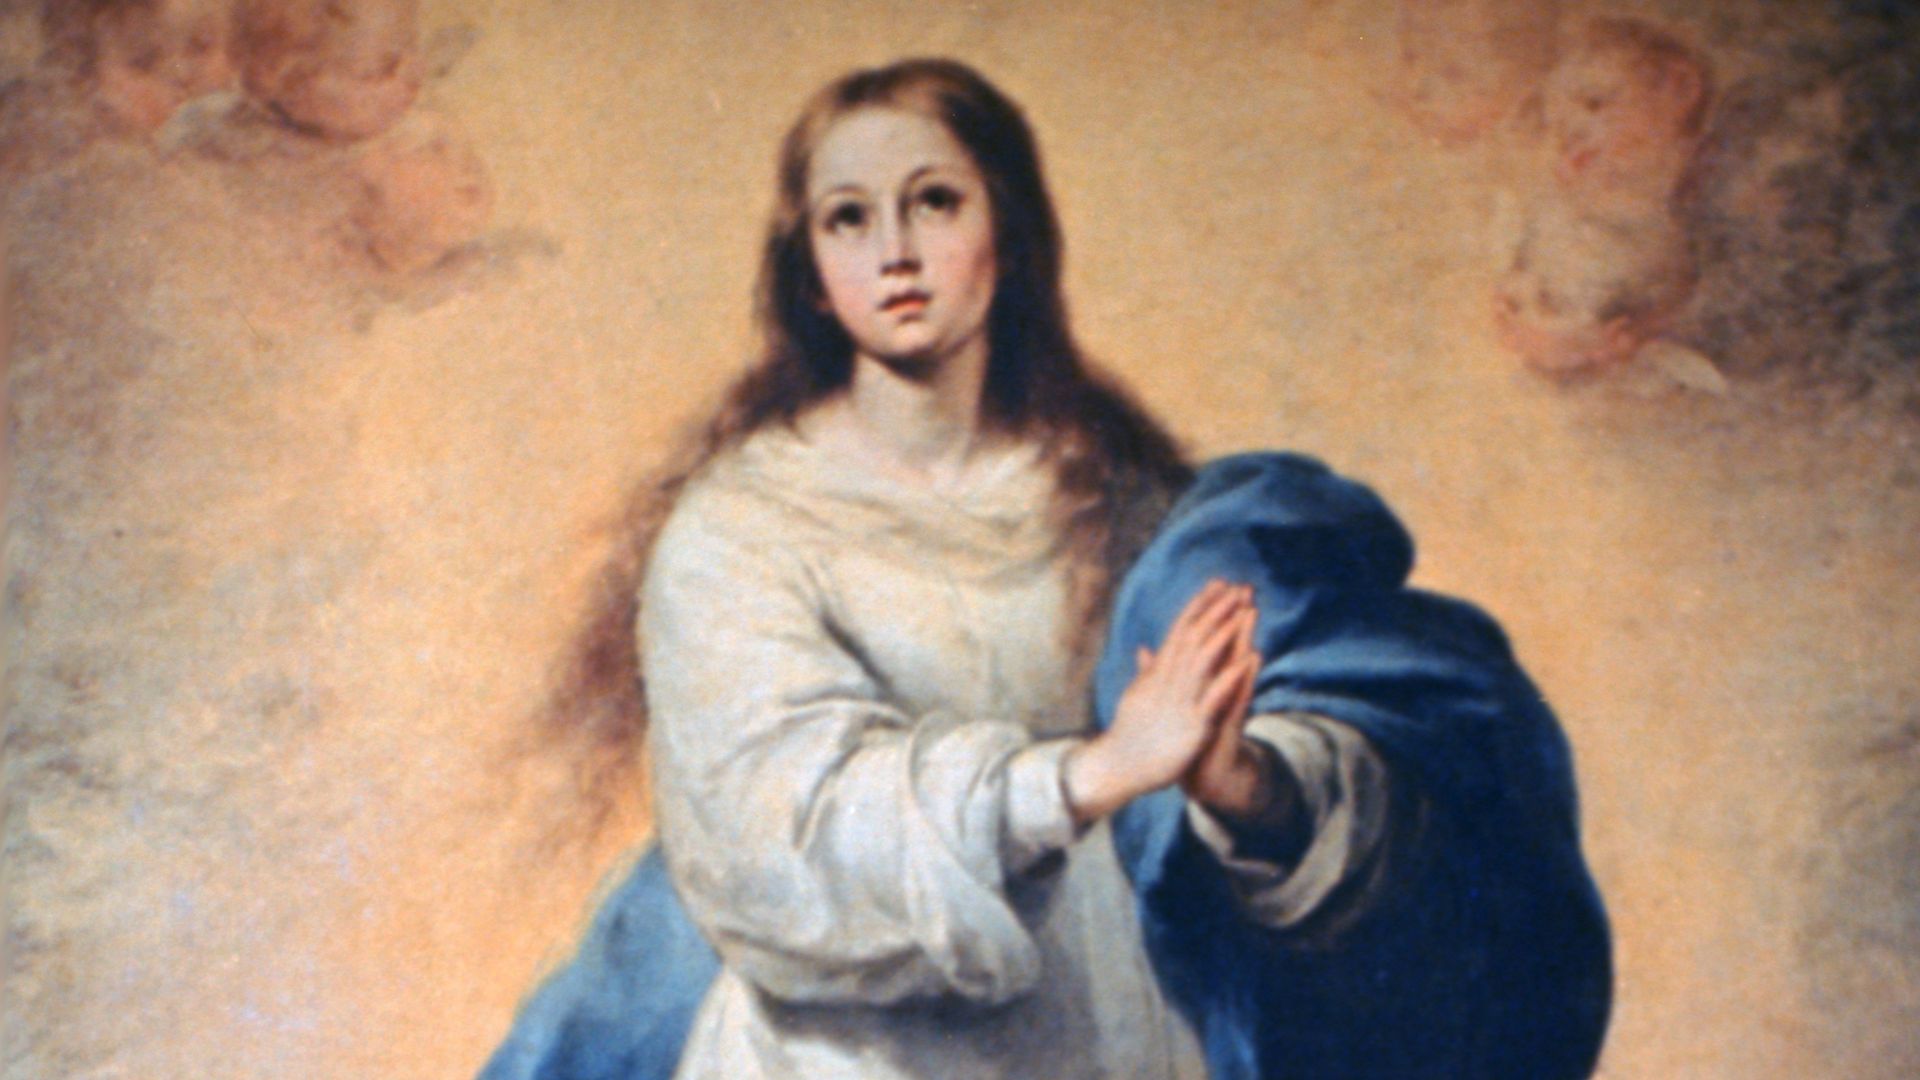 "The immaculate Conception of Los venerables" by Spanish painter Bartolome Murillo at the Prado Museum on June 4, 2020 in Madrid